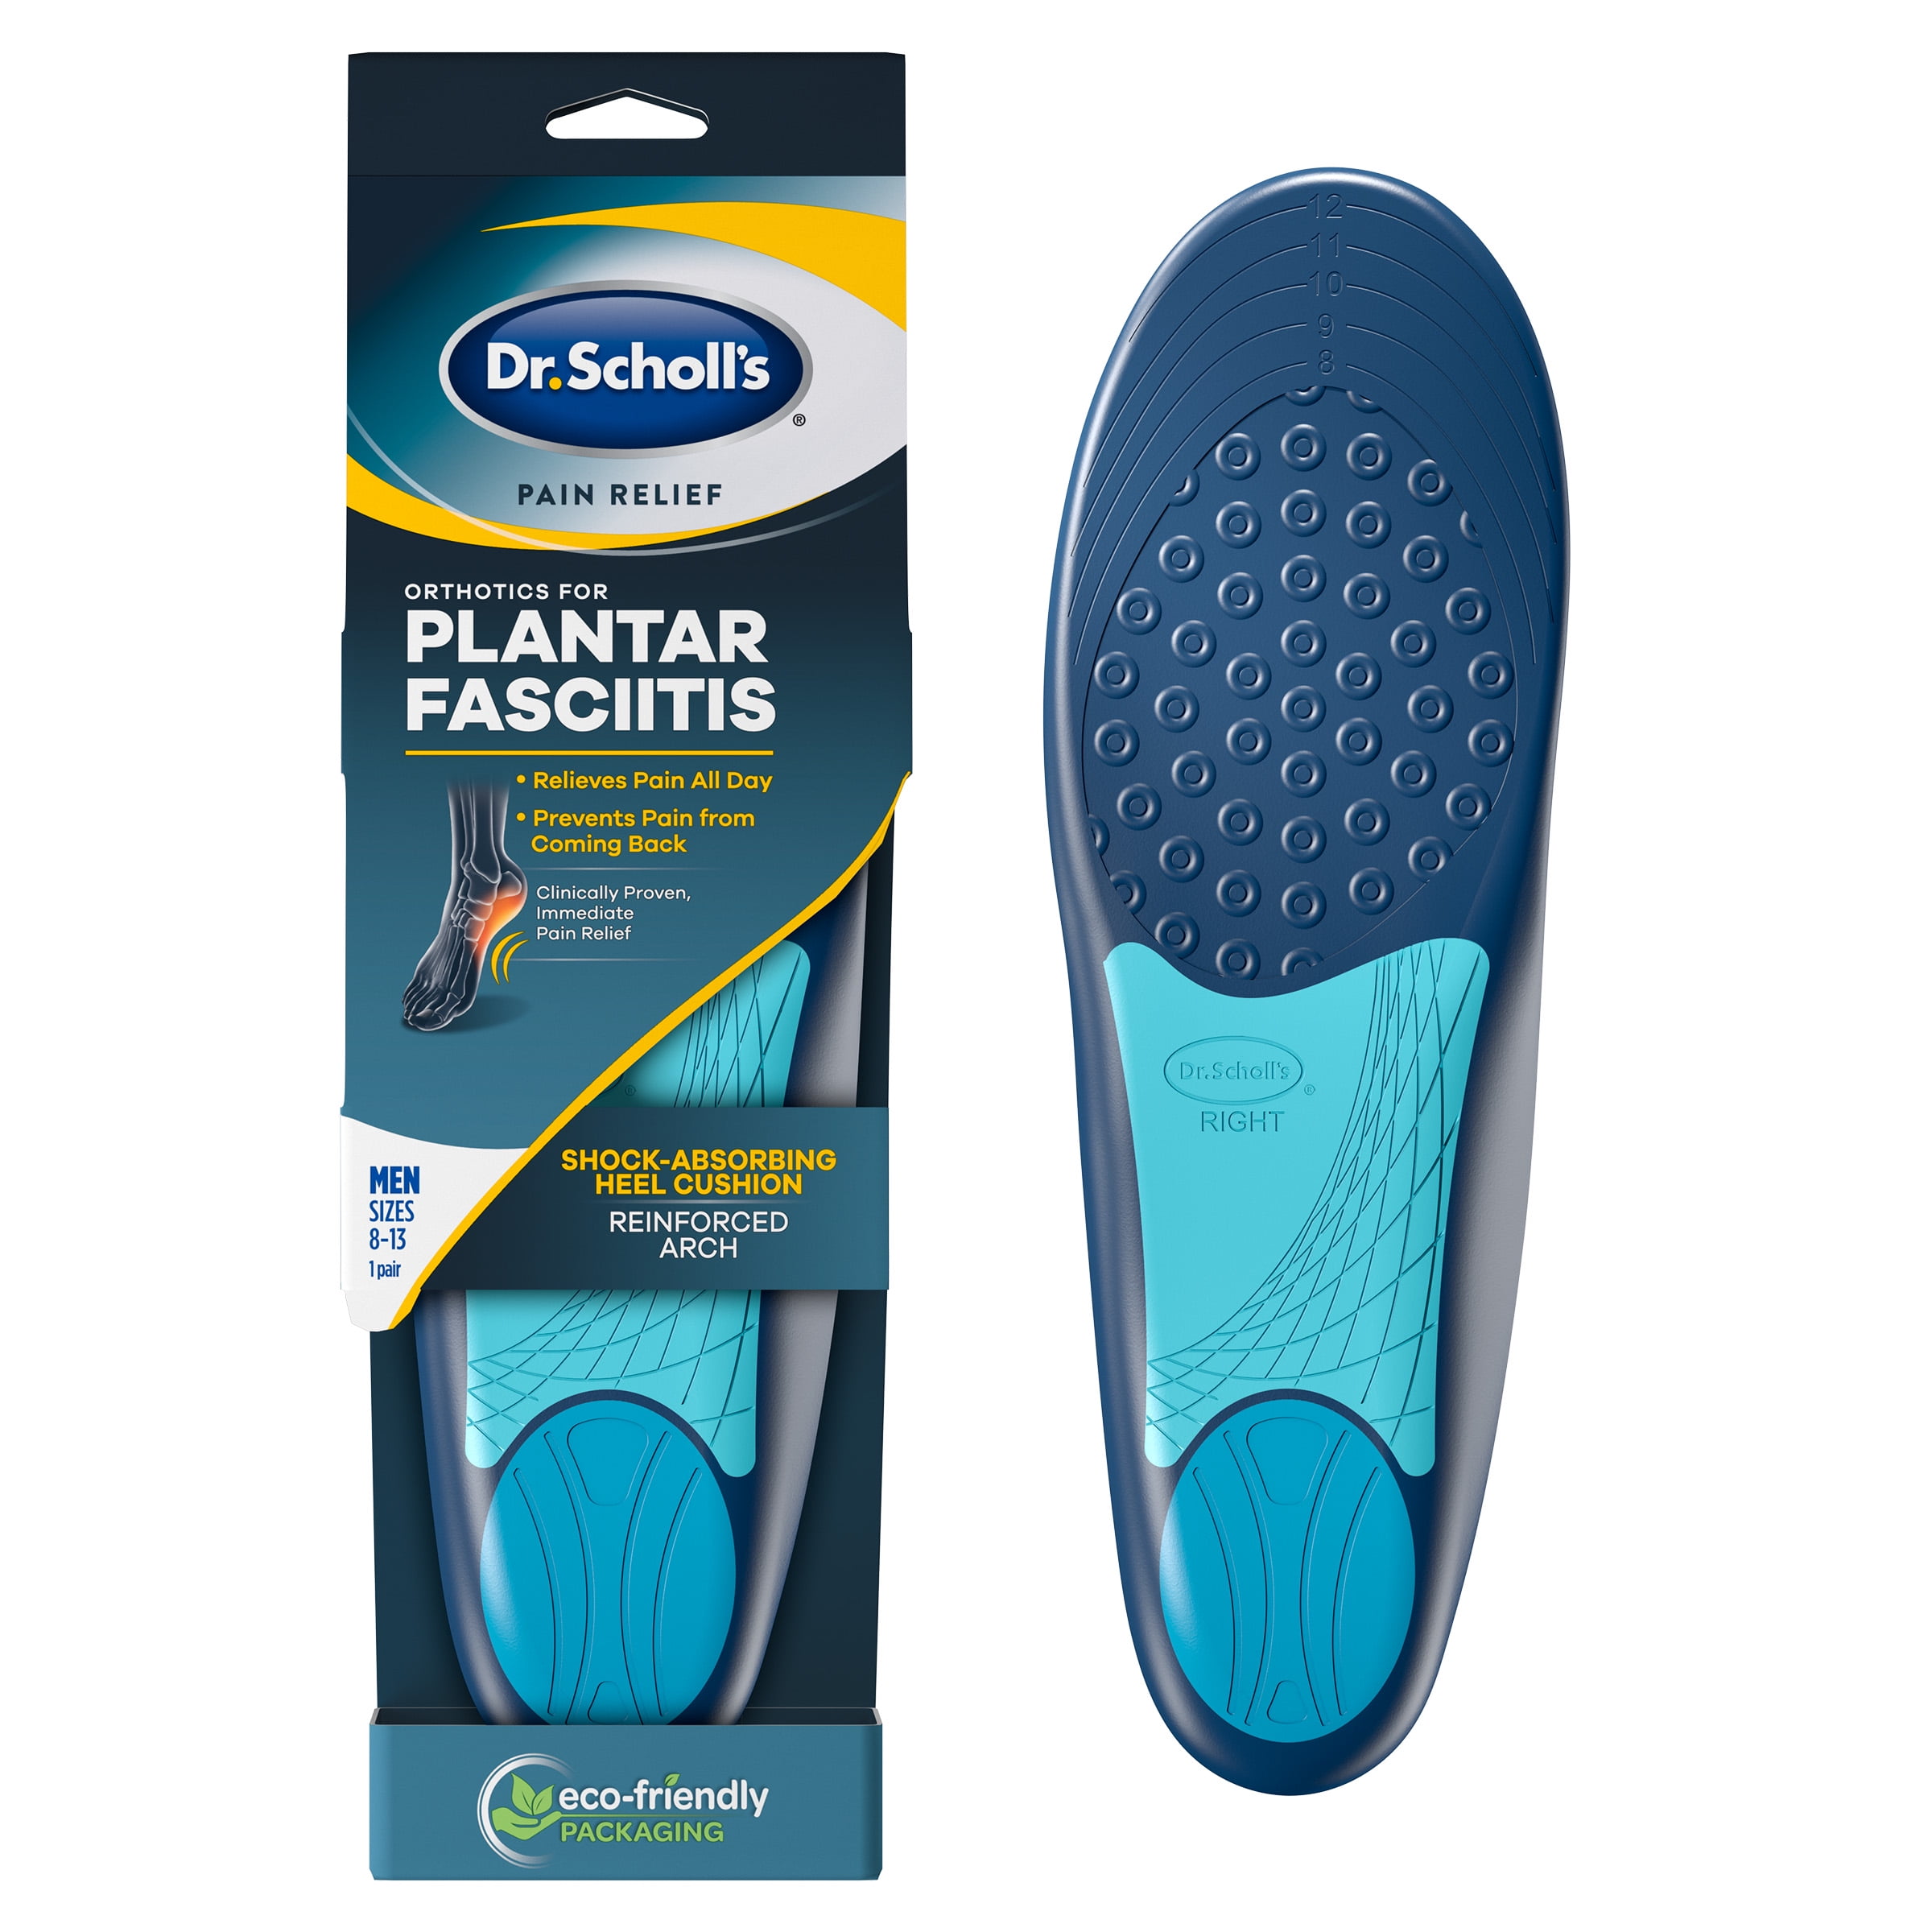 Dr. Scholls Plantar Fasciitis Pain Relief Orthotic Inserts for Men (8-13) Insoles to Relieve and Prevent Pain